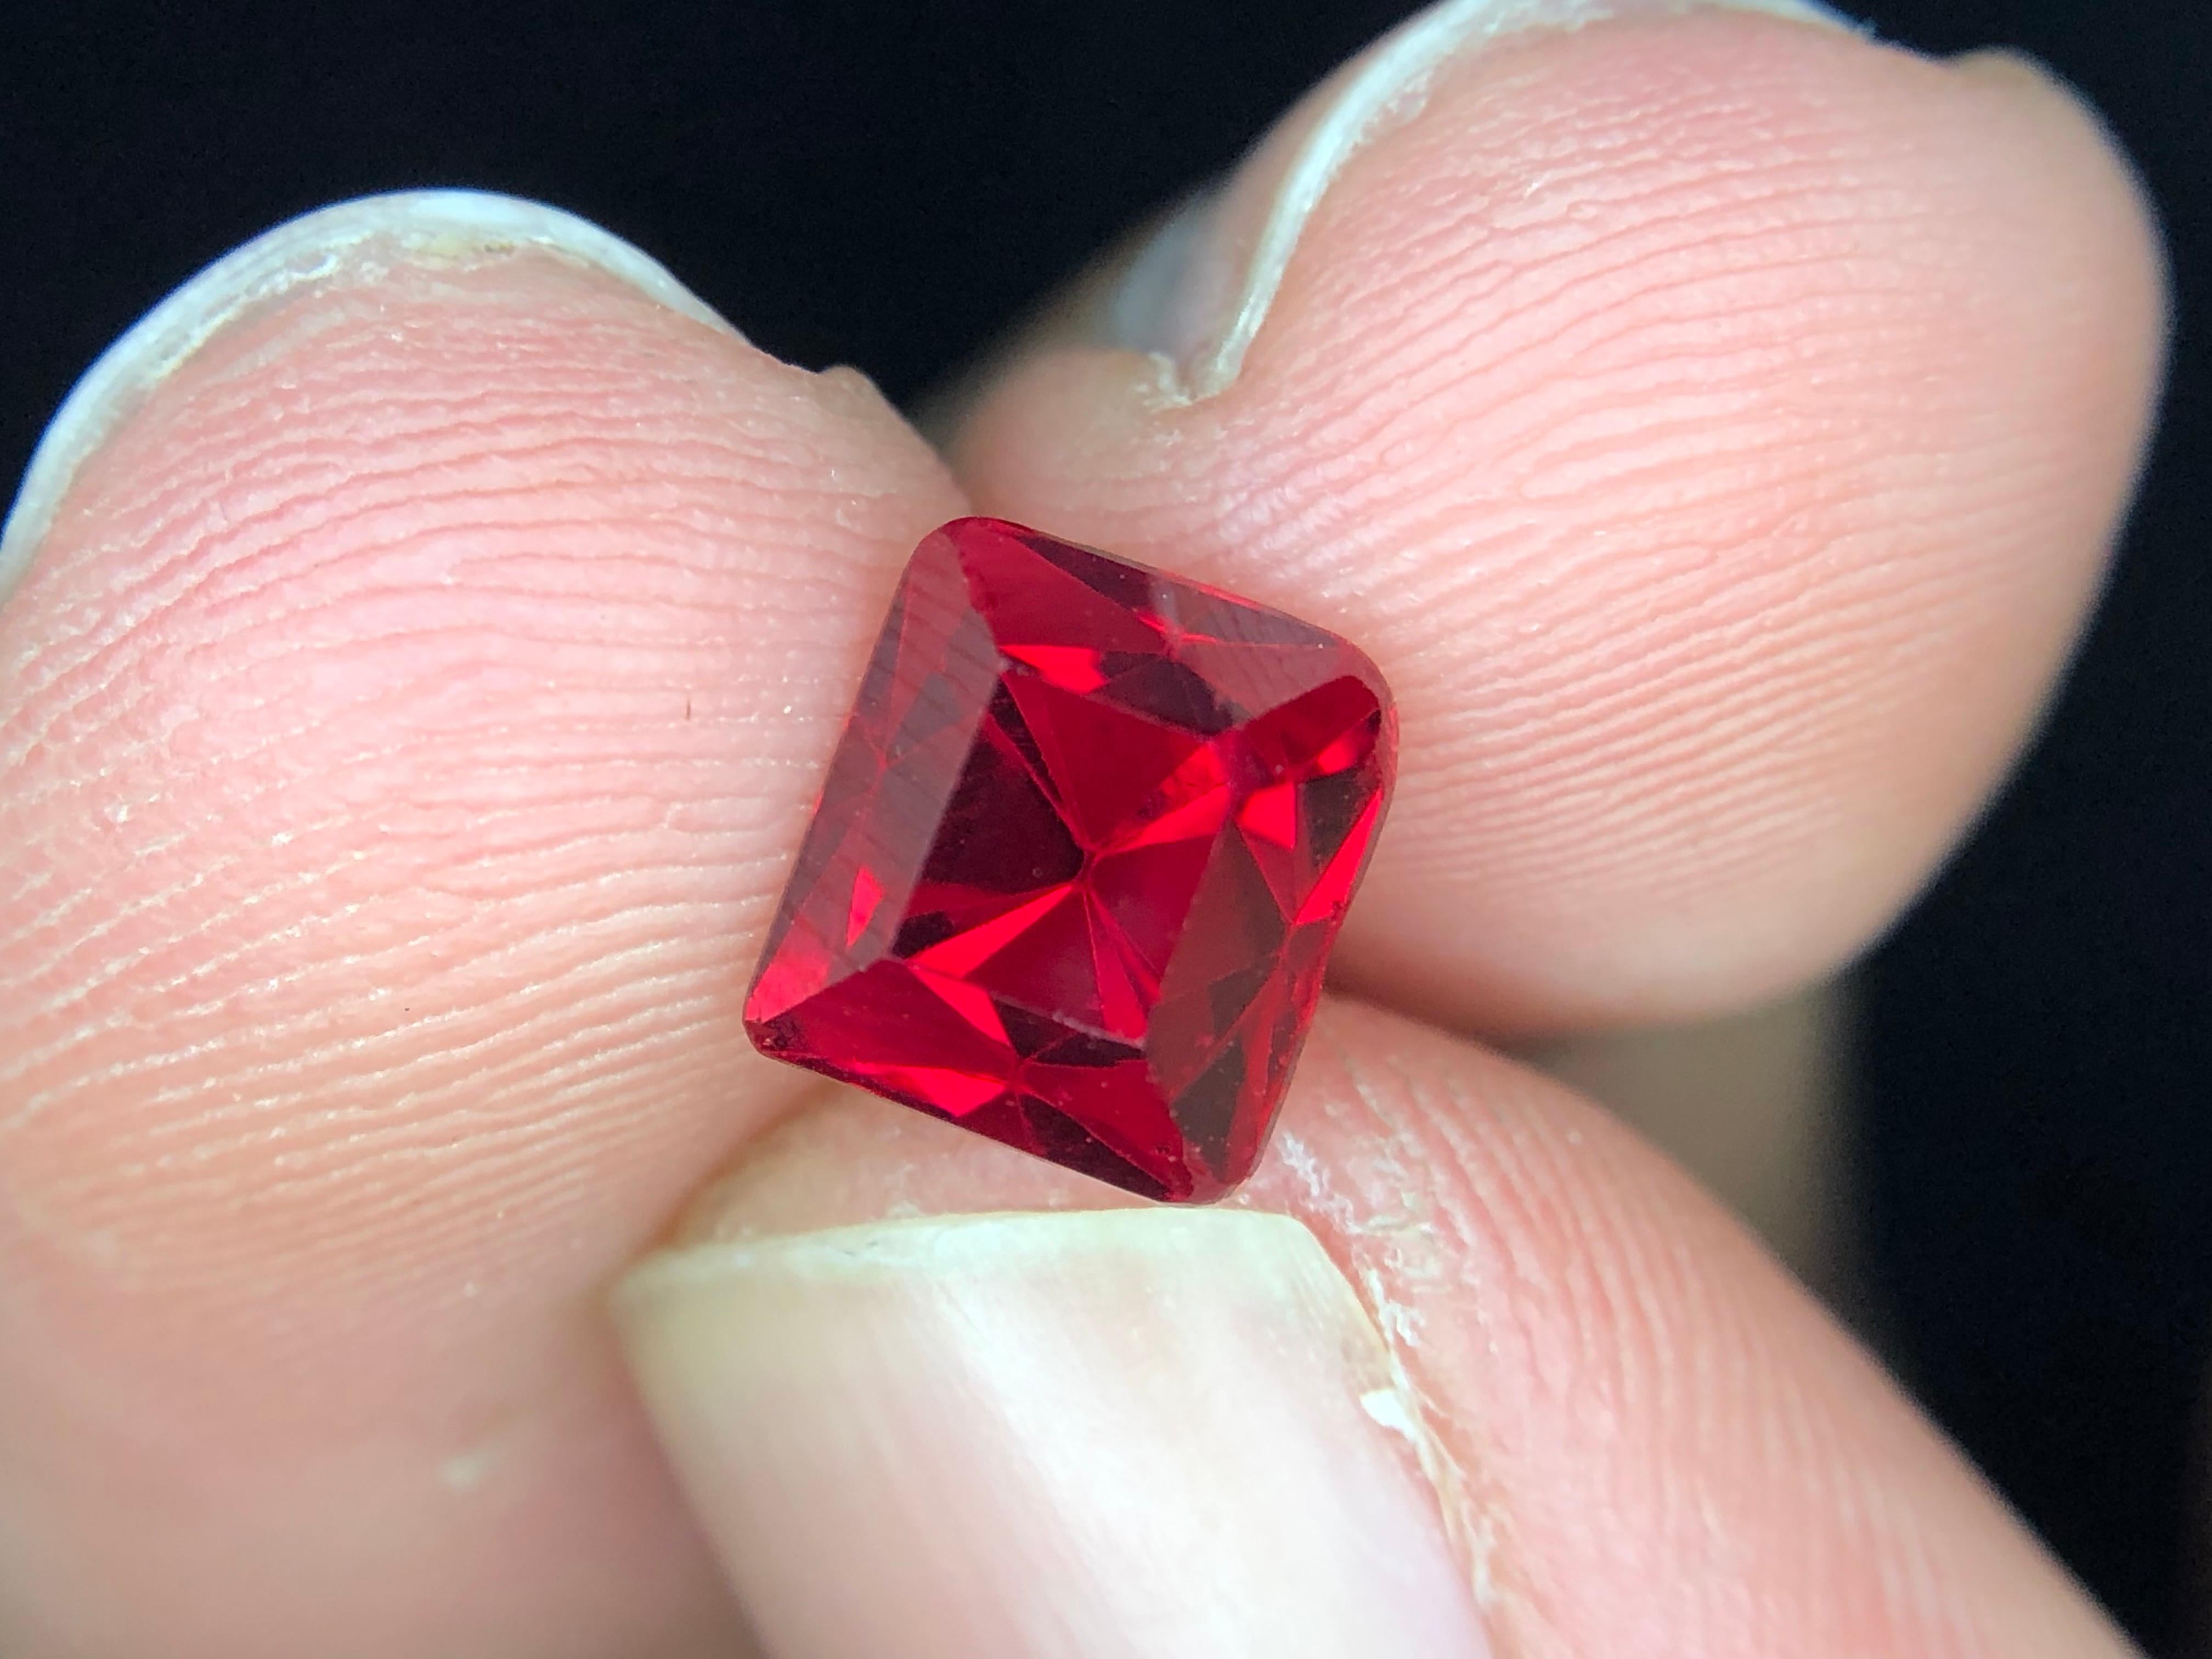 Vector Stones: Rare Gemstone Collector's Item

Introducing a beautiful Angel Cut Spinel from Burma. The gemstone is certified by GRS and boasts a vivid Red color grading. This gemstone is truly a collector's piece, being 98% loupe clean. Named for